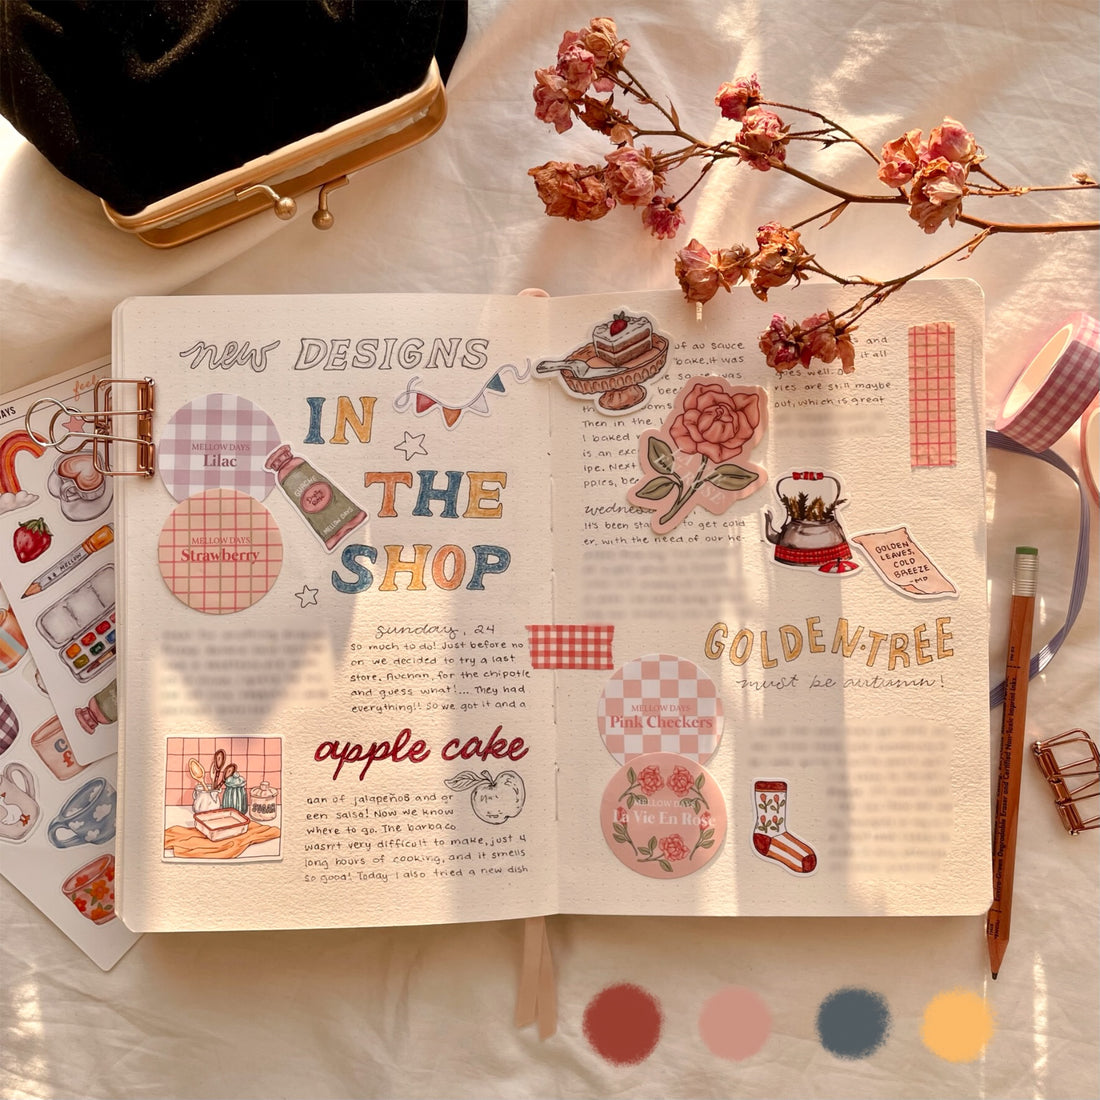 How To Achieve The Perfect Bullet Journal Scrapbook Look!